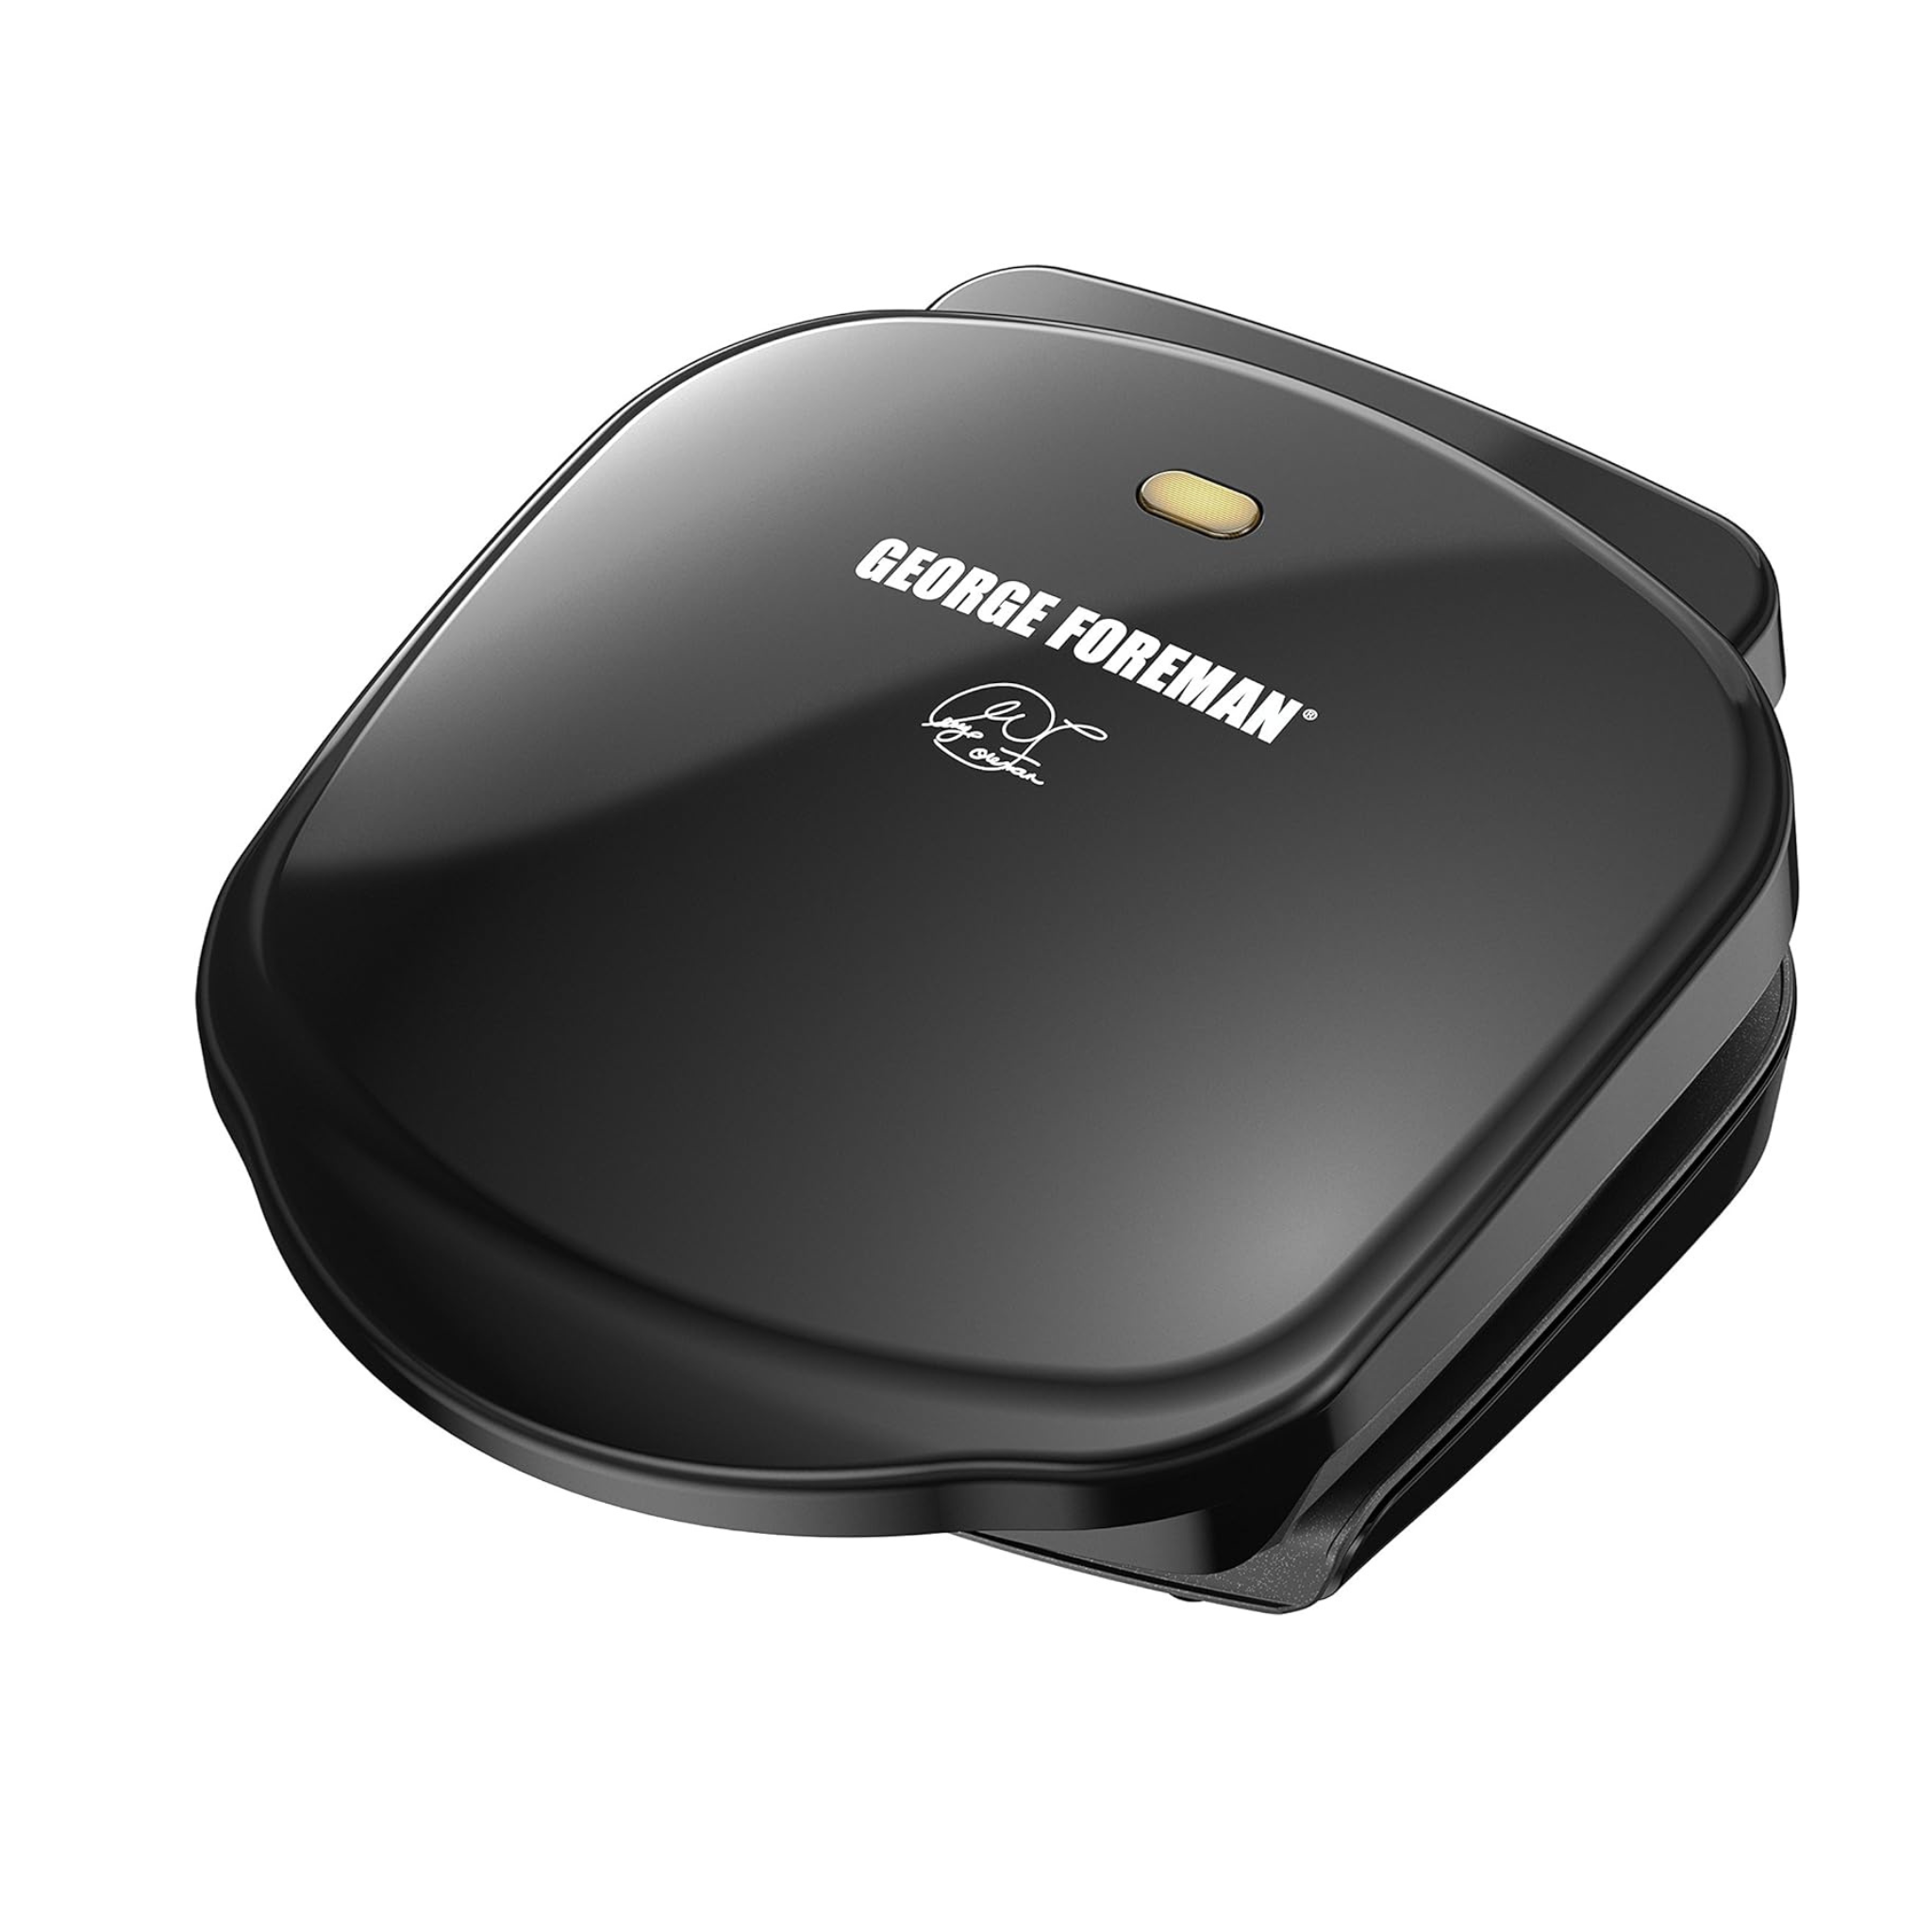 George Foreman 2-Serving Classic Plate Electric Indoor Grill